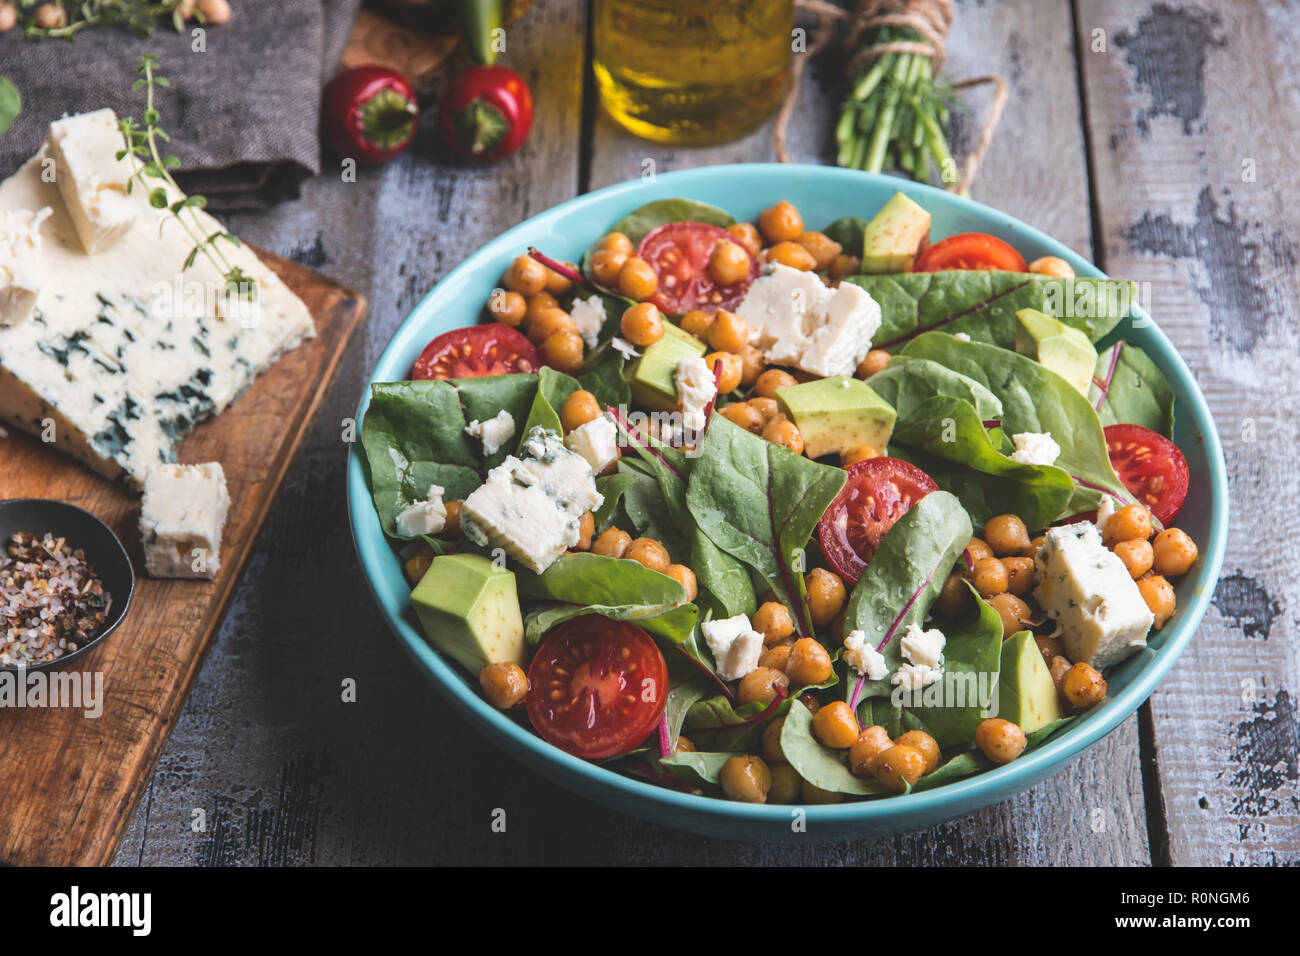 Healthy vegan salad with avocado ,beet leaves ,chickpea, broccoli ,tomato,blue cheese Stock Photo